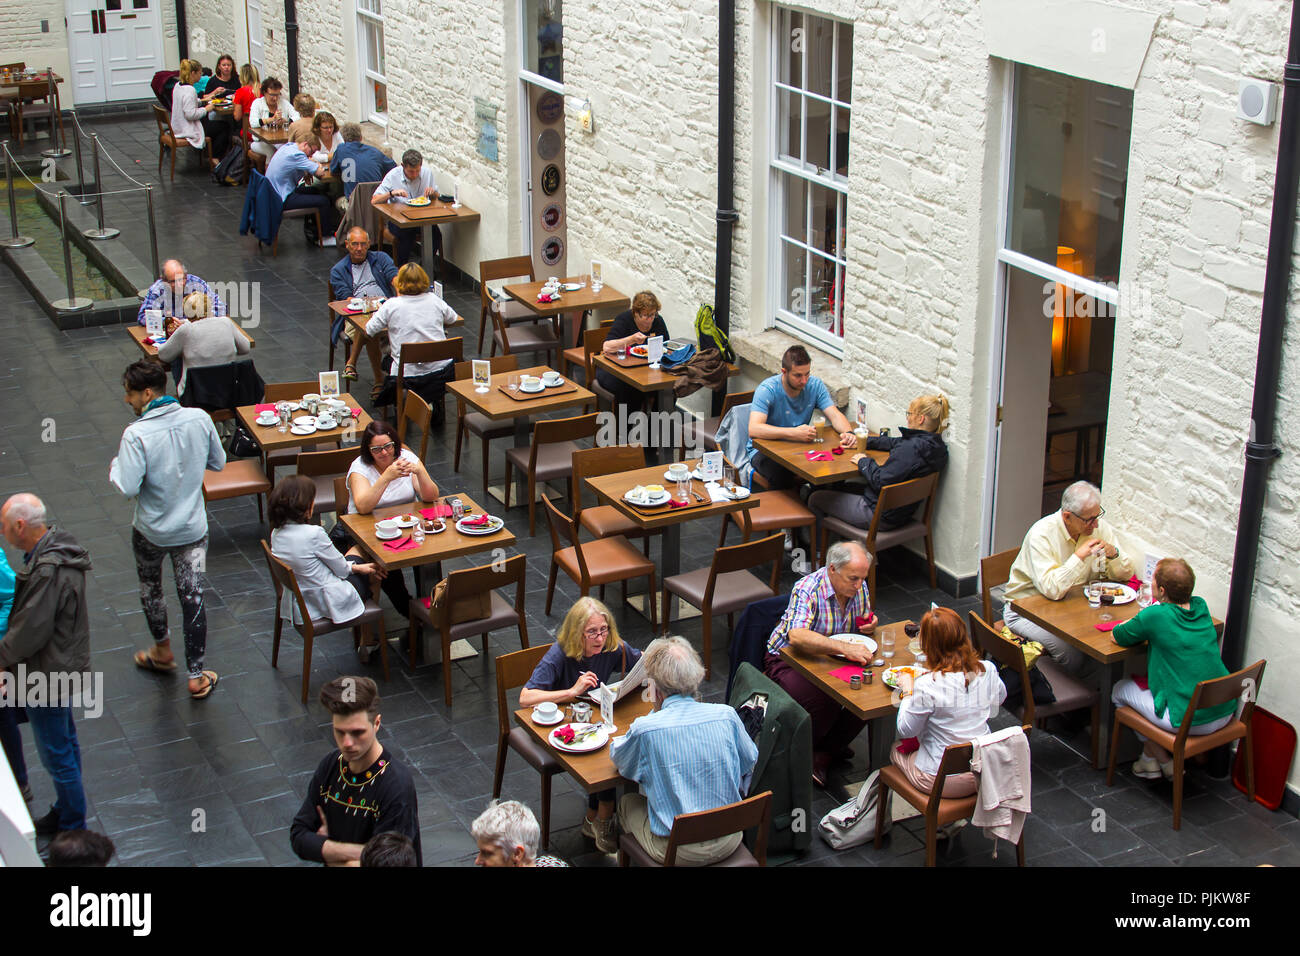 20 July 2018 Diners eating lunch in the restaurant of the famous Chester Beatty Musuem in Dublin Castle Ireland Stock Photo